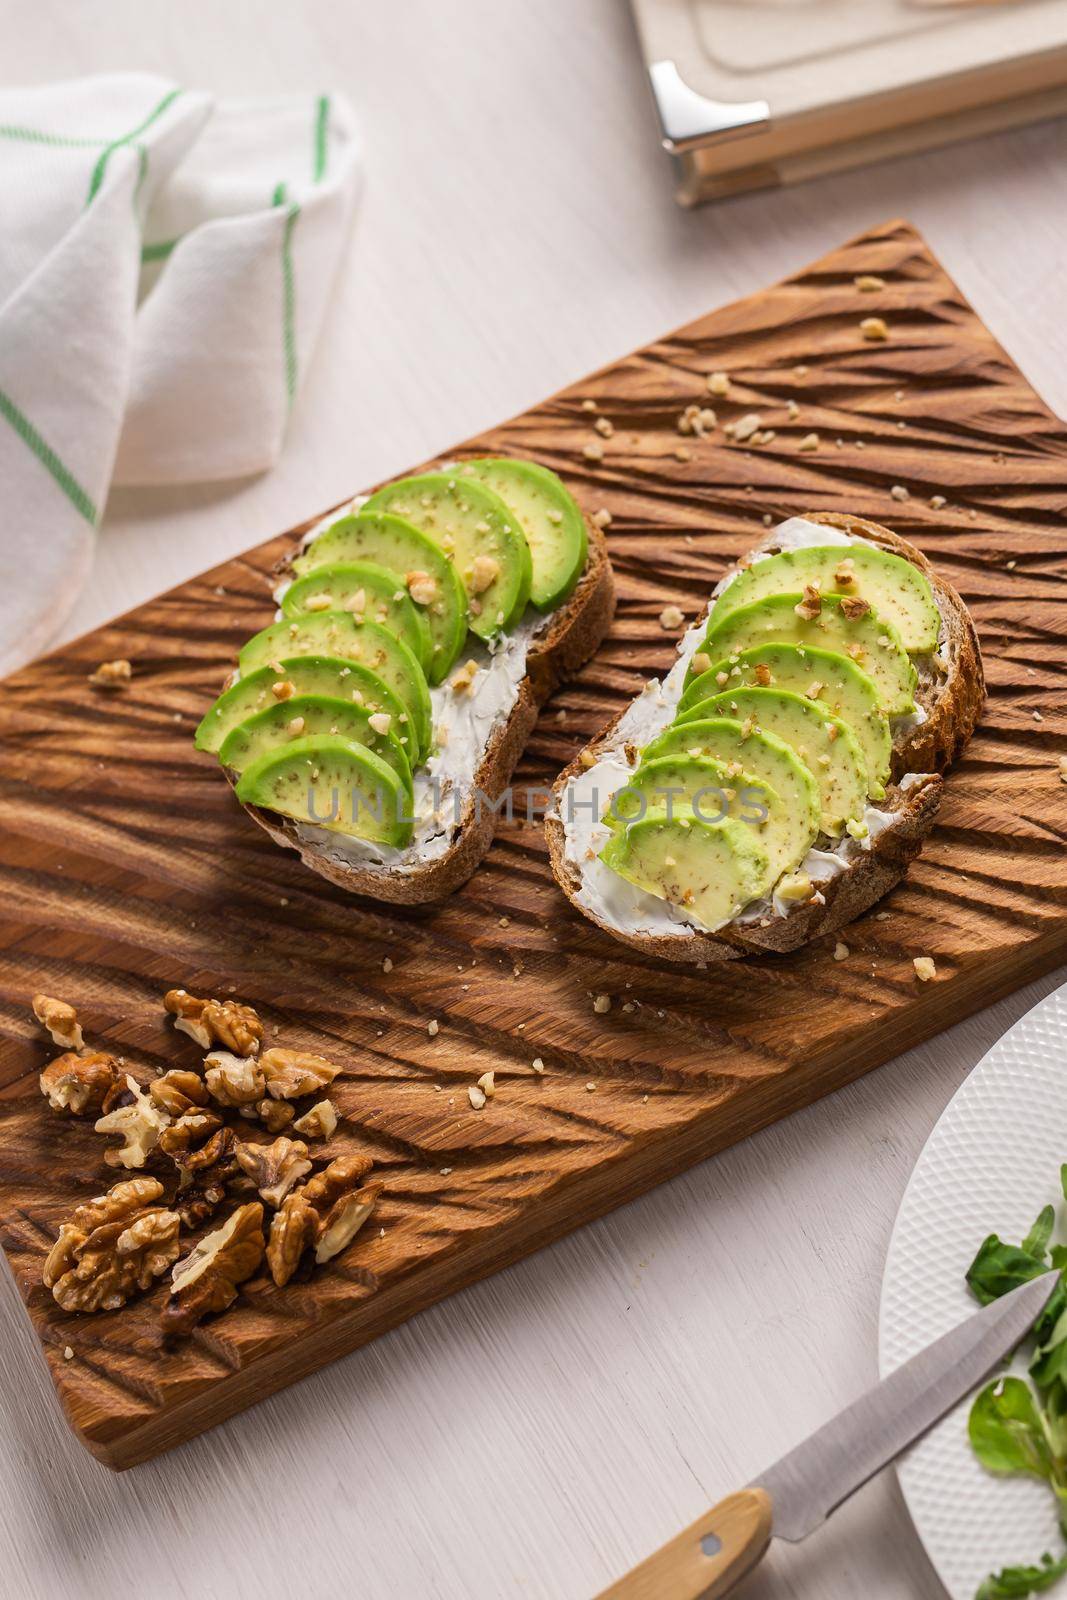 Avocado sandwich on dark rye bread made with fresh sliced avocados from above and nuts. Breakfast concept. by Satura86